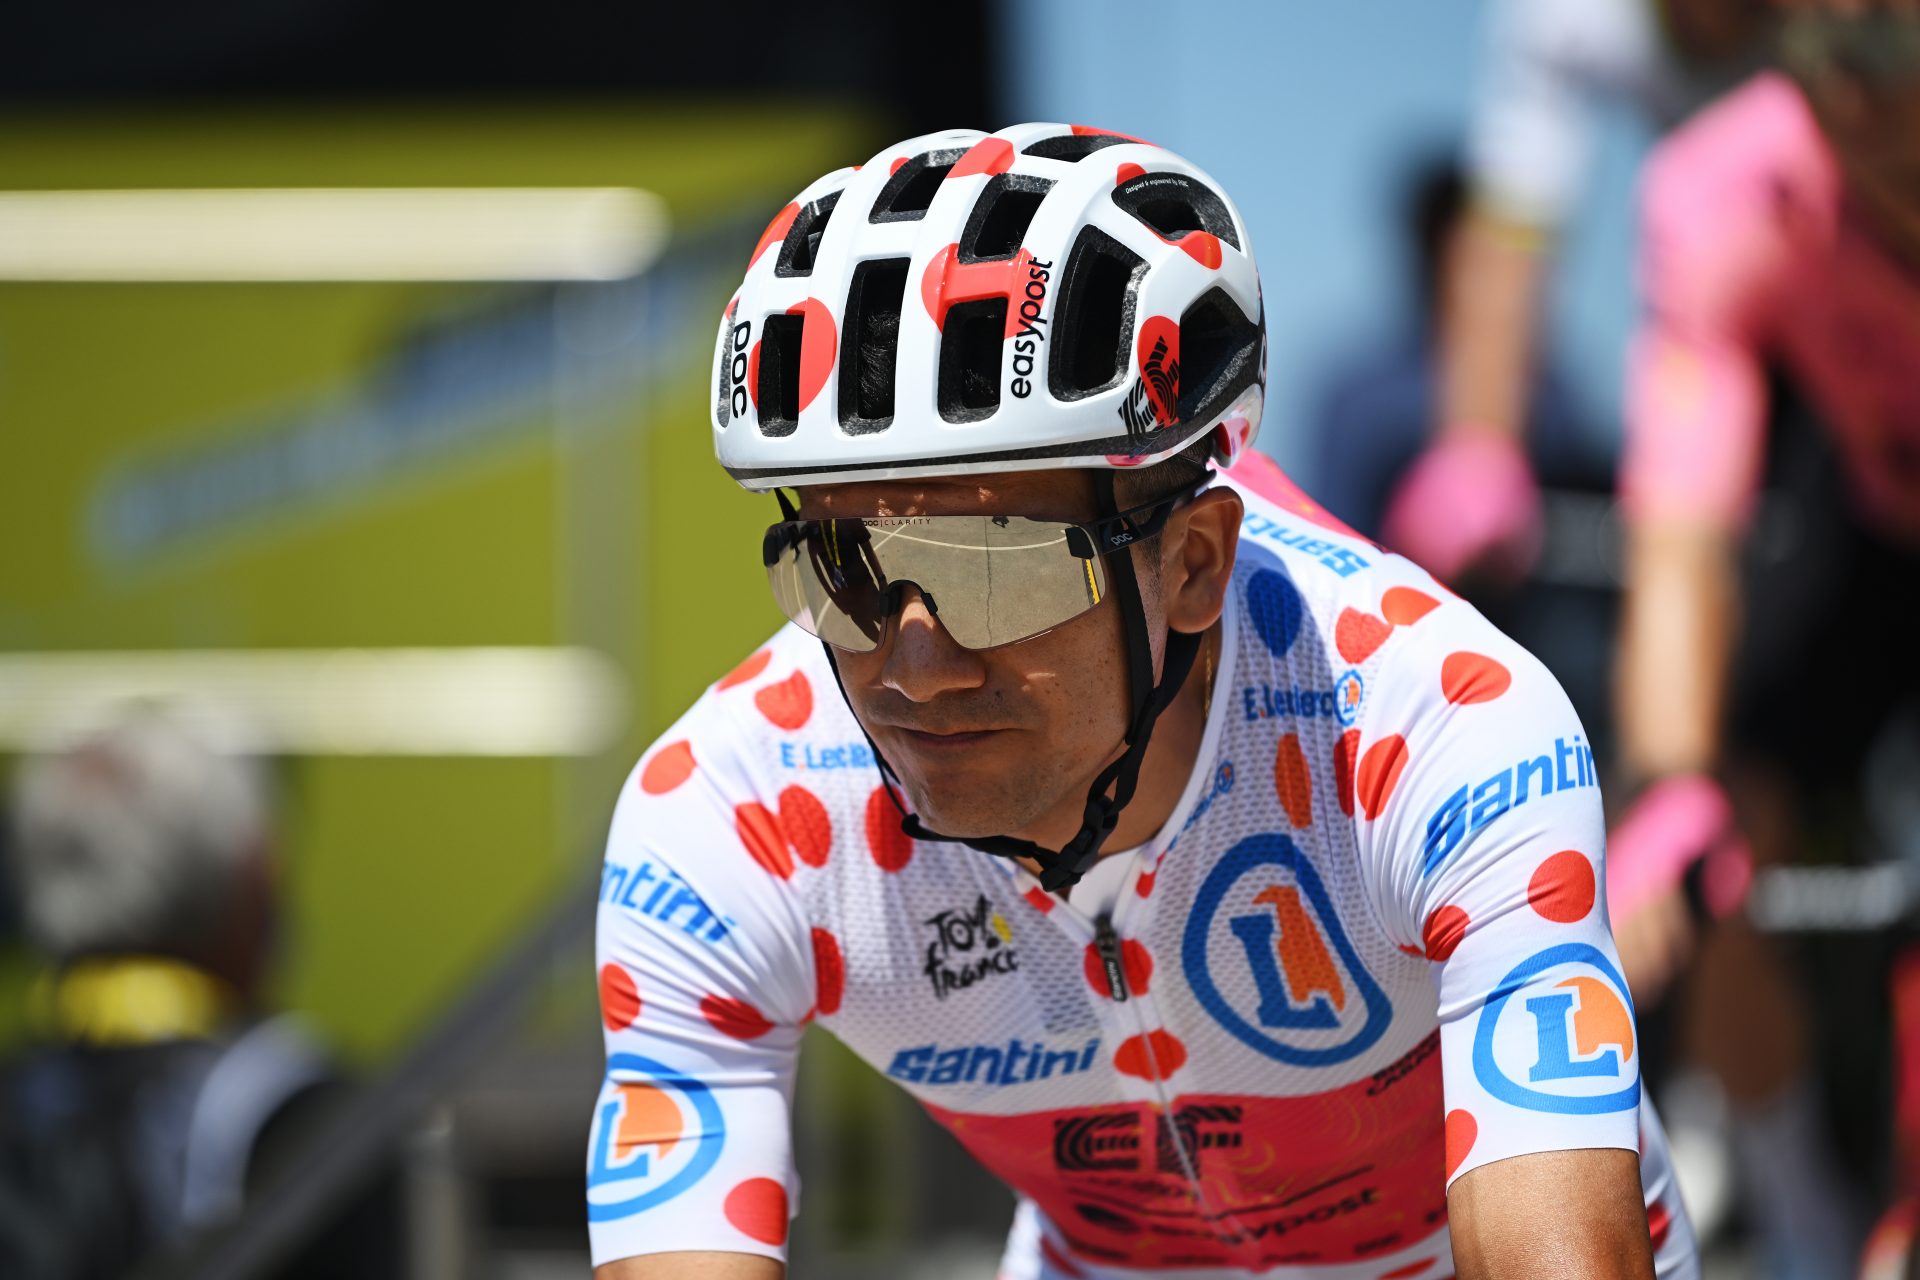 The last 20 winners of the polka dot jersey in the Tour de France